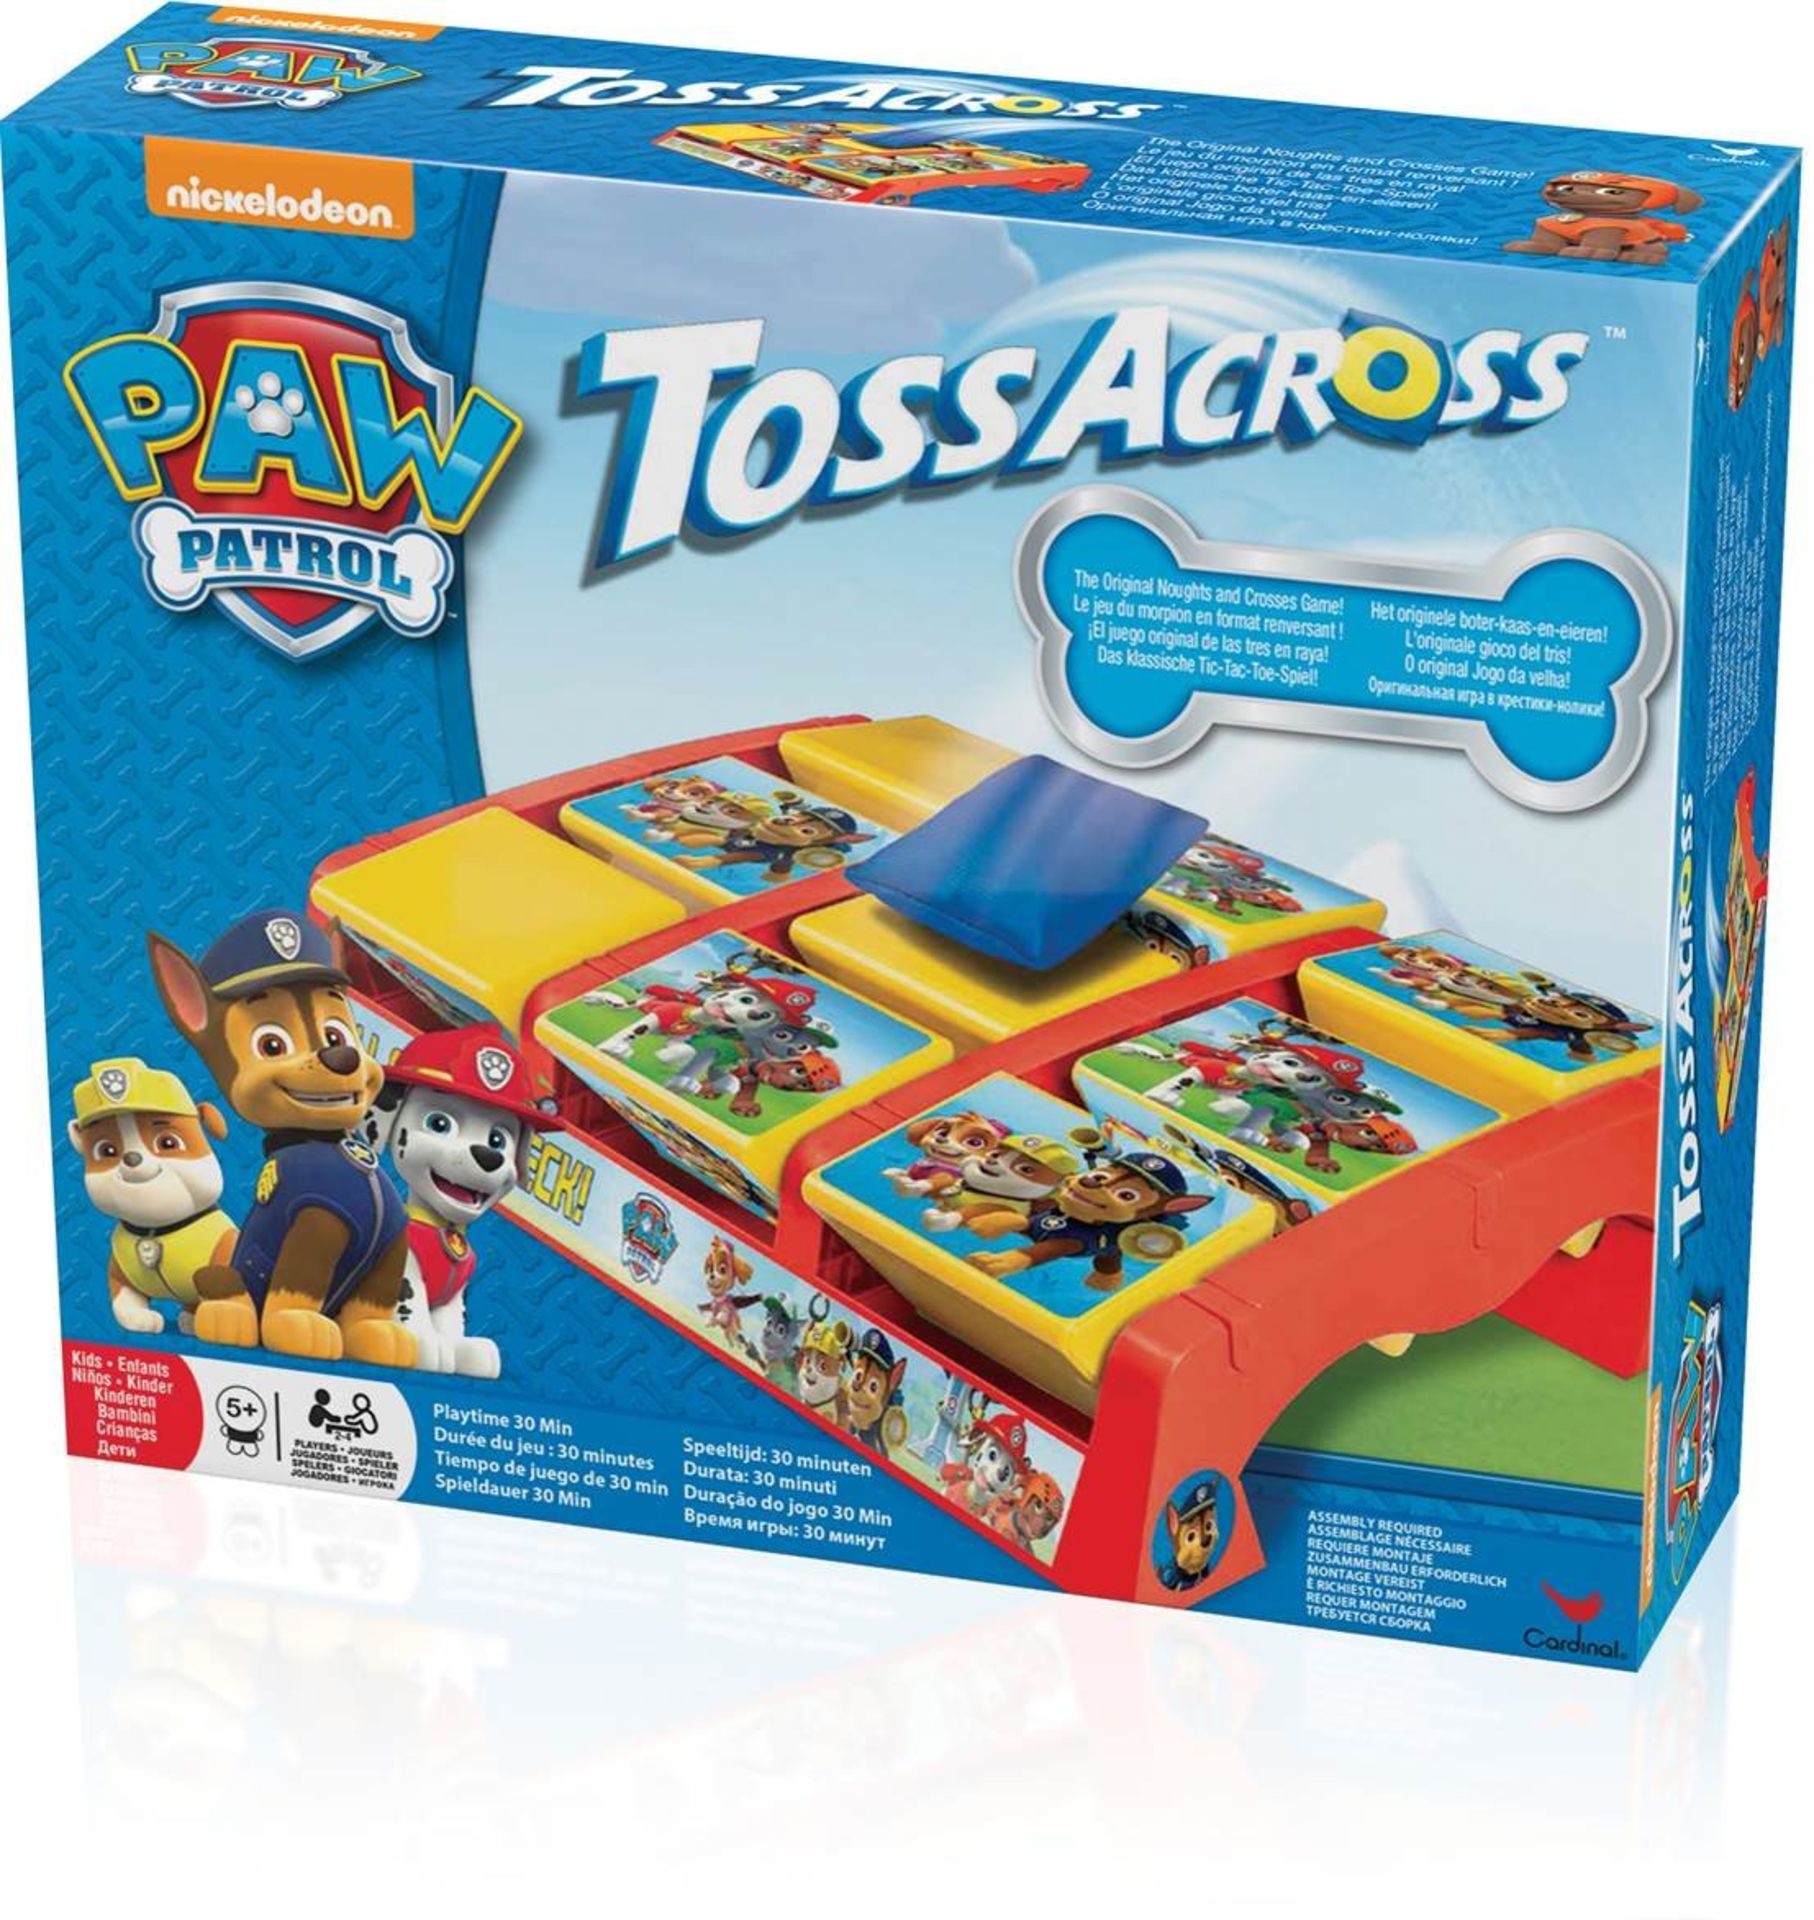 21 x Paw Patrol Table Top Toss and Cross Game (6028795) | 778988238394 | RRP £ 356.79